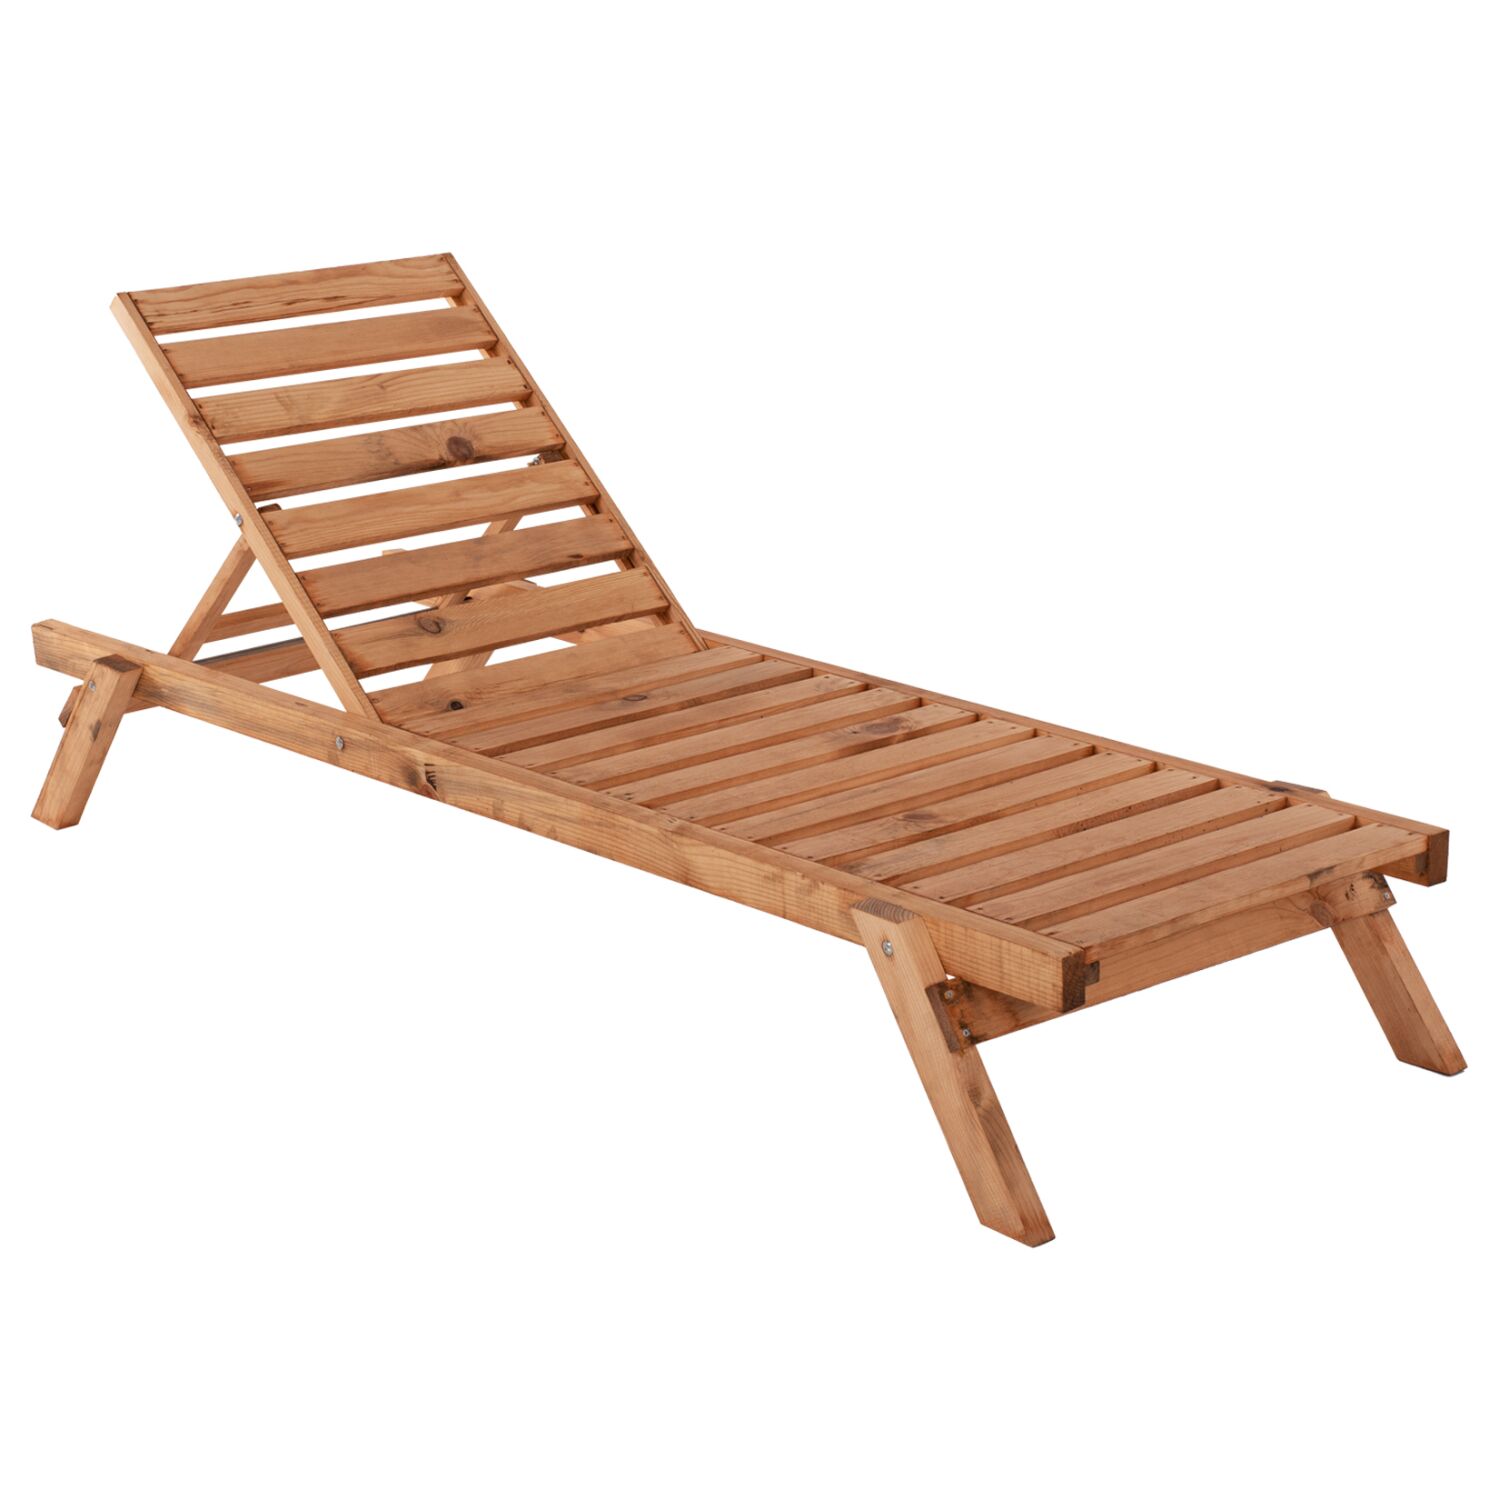 PROFESSIONAL SUNBED HM11431.03 FIR WOOD IN NATURAL SHADE 72x196x29-84H cm.